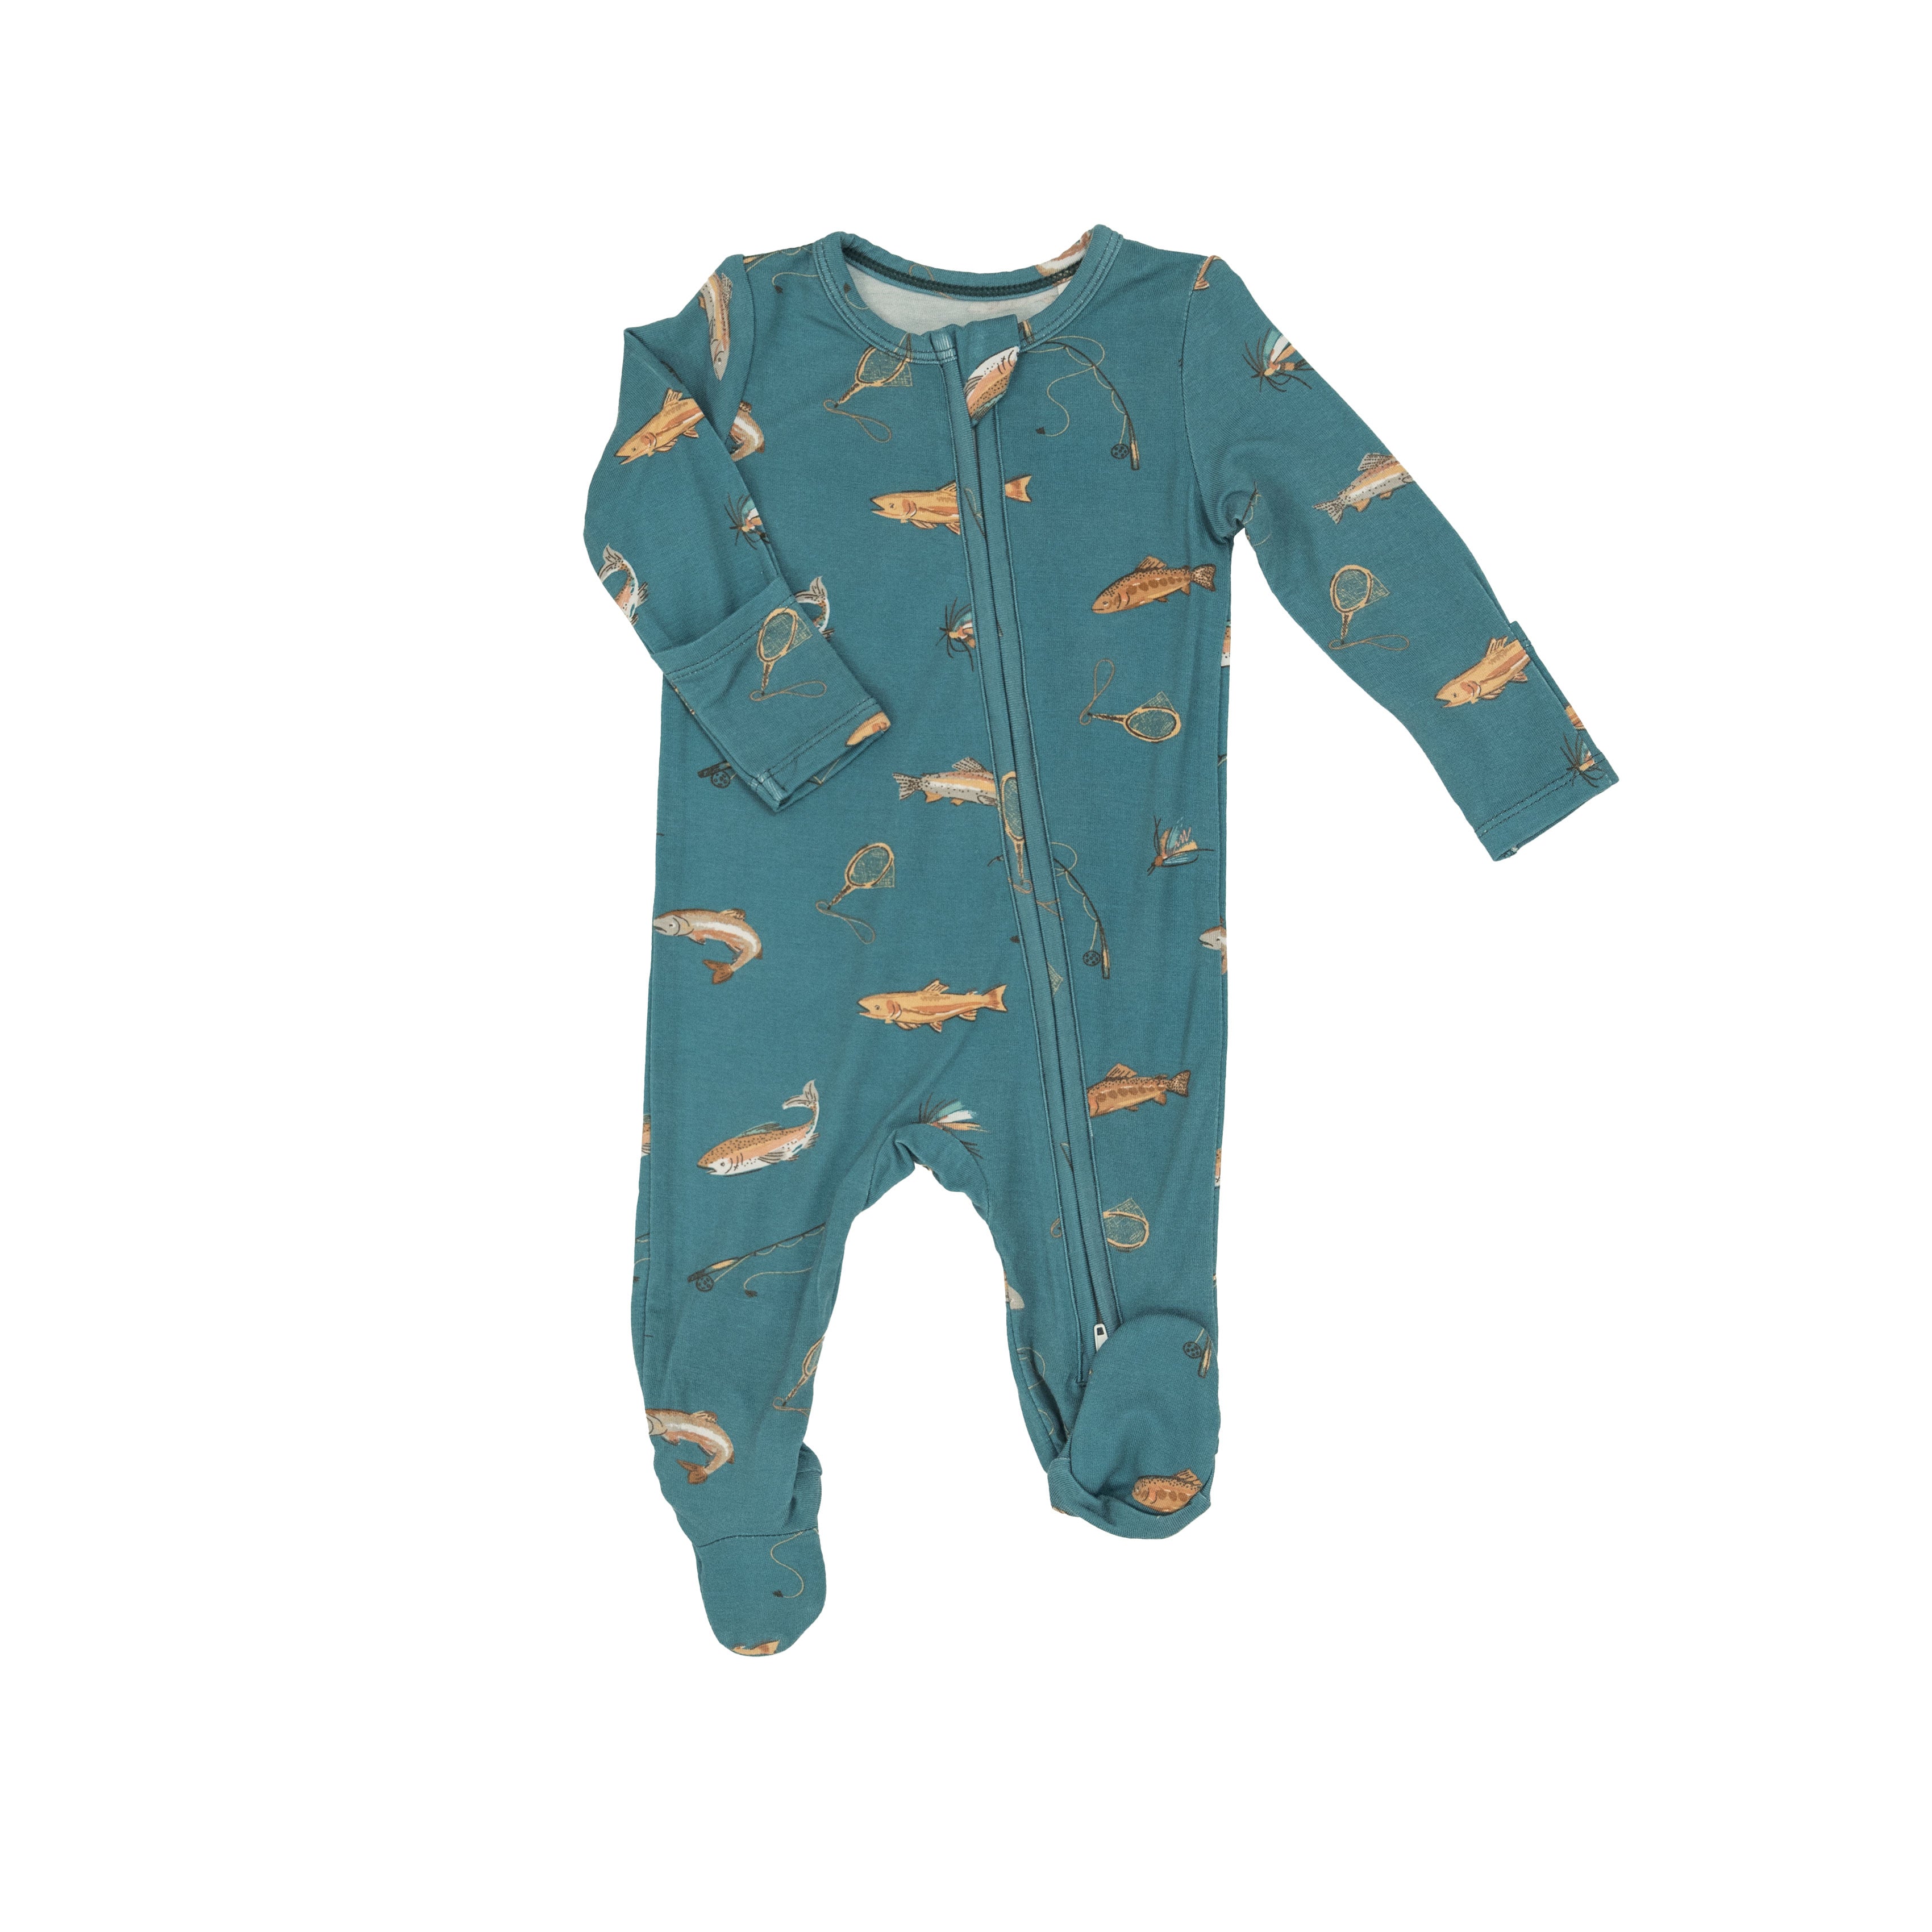 teal colored zipper footie with brown trout print